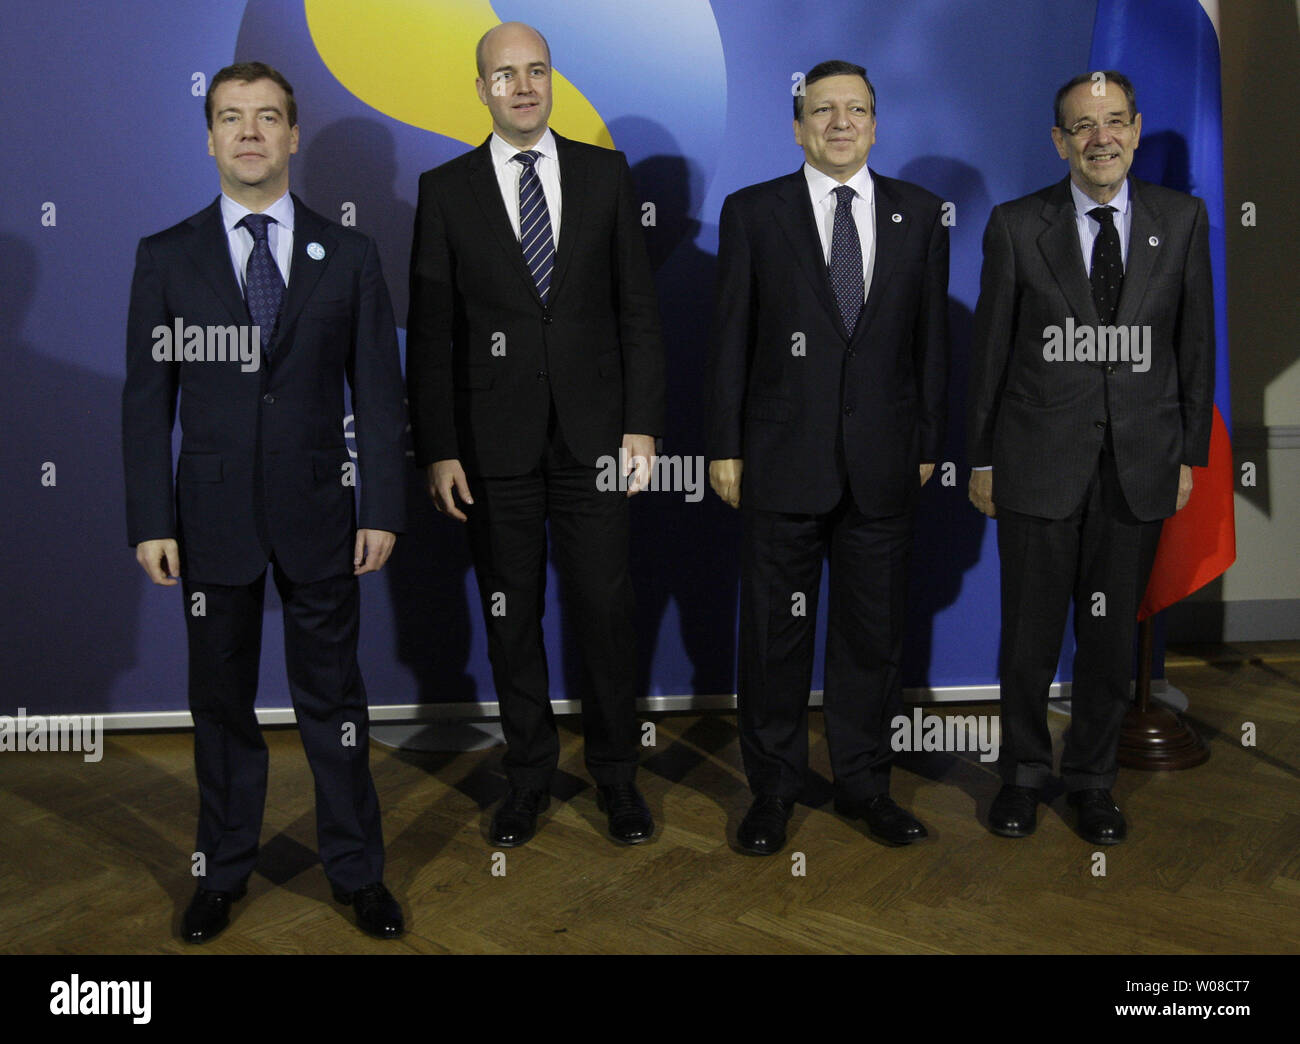 (L-R) Russian President Dmitry Medvedev, Swedish Prime Minister Fredrick Reinfeldt, European Commission President Jose Manuel Barroso and EU Foreign Policy Javier Solana pose for a group photo at the begging of  a one-day EU-Russia summit in Stockholm on November 18, 2009. UPI/Anatoli Zhdanov Stock Photo